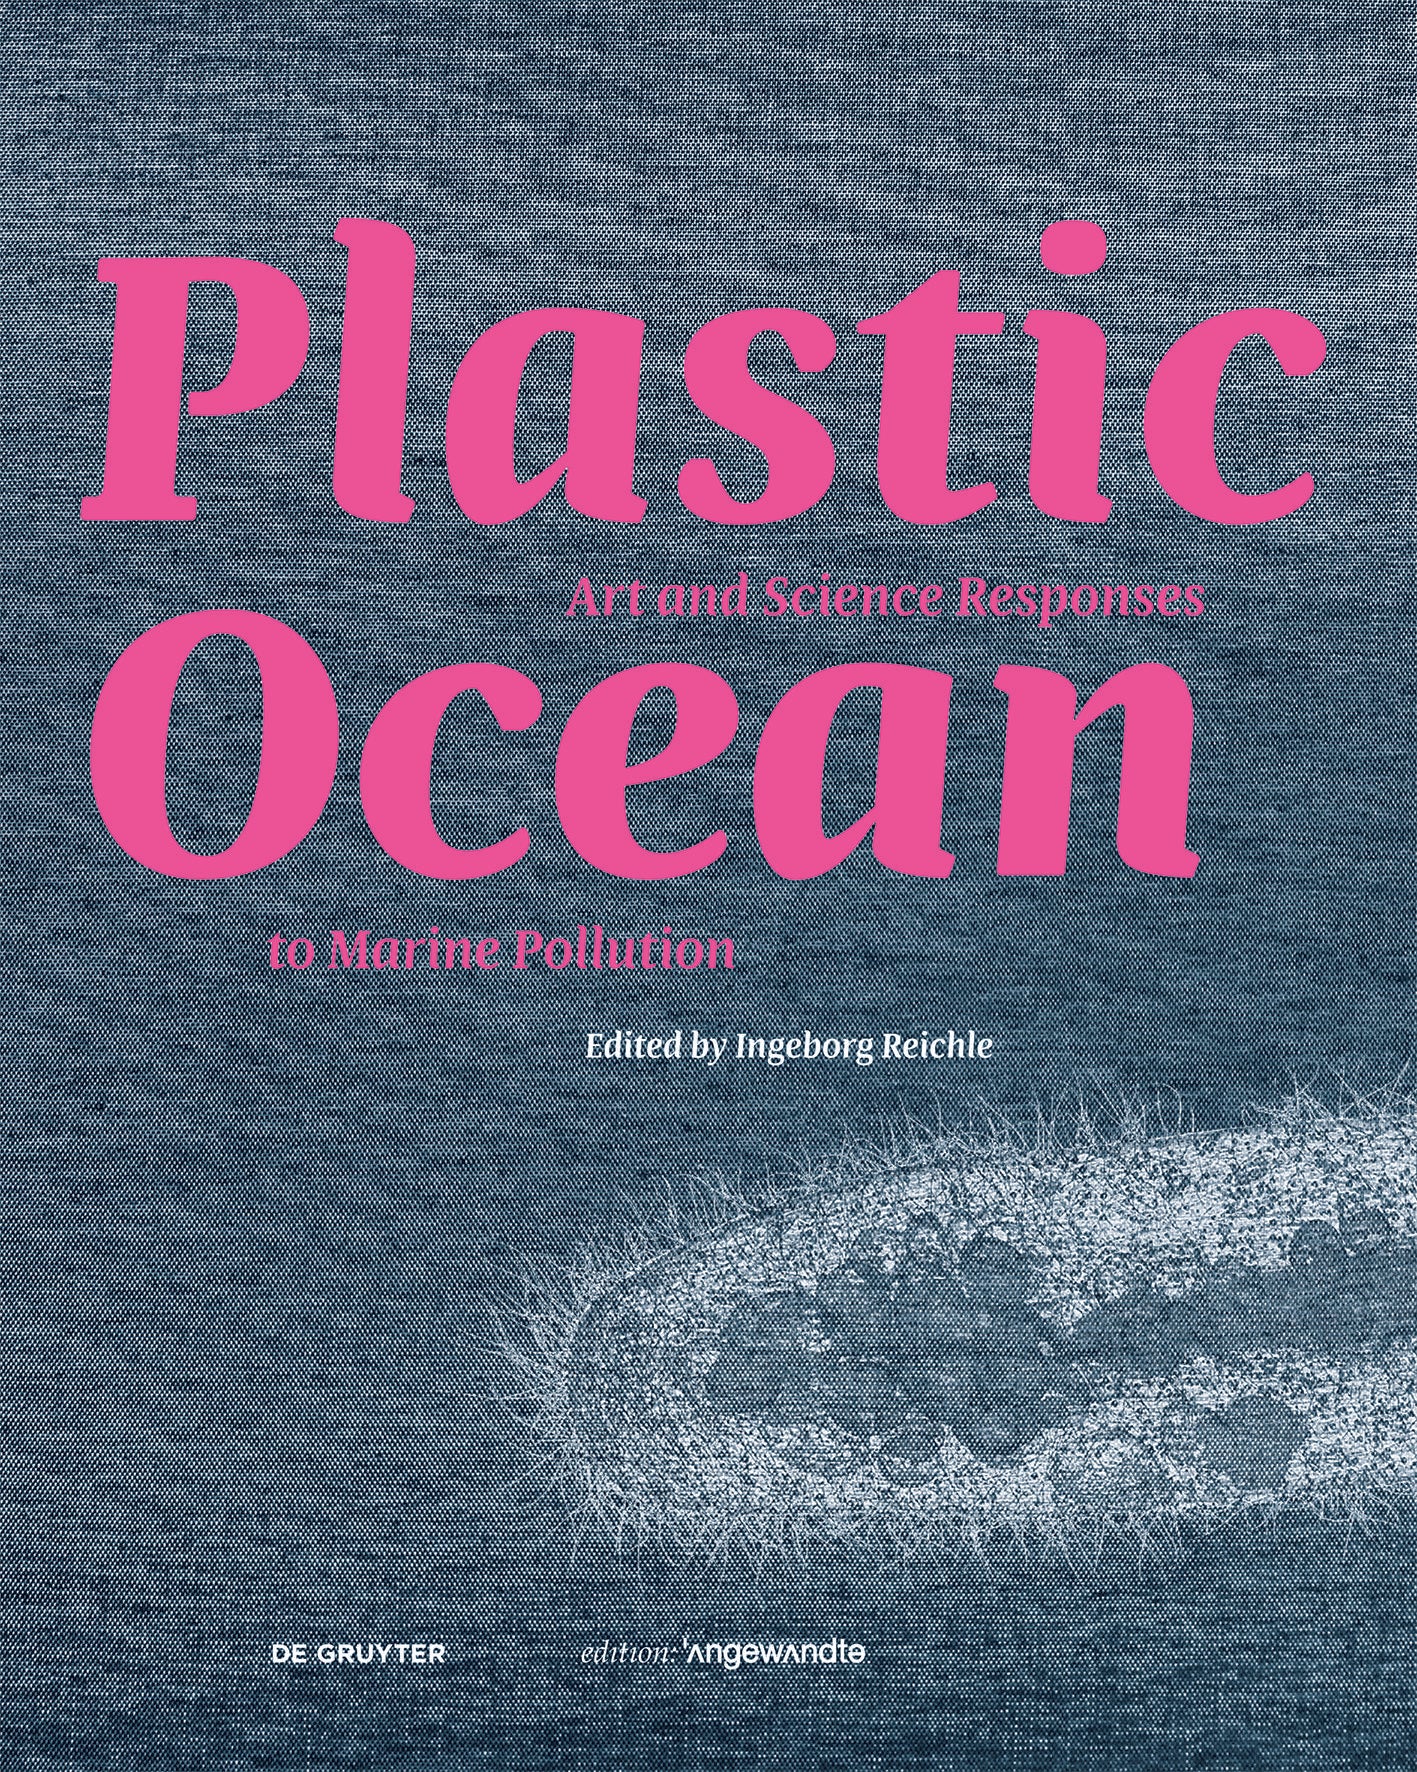 Plastic Ocean: Art and Science Responses to Marine Pollution cover